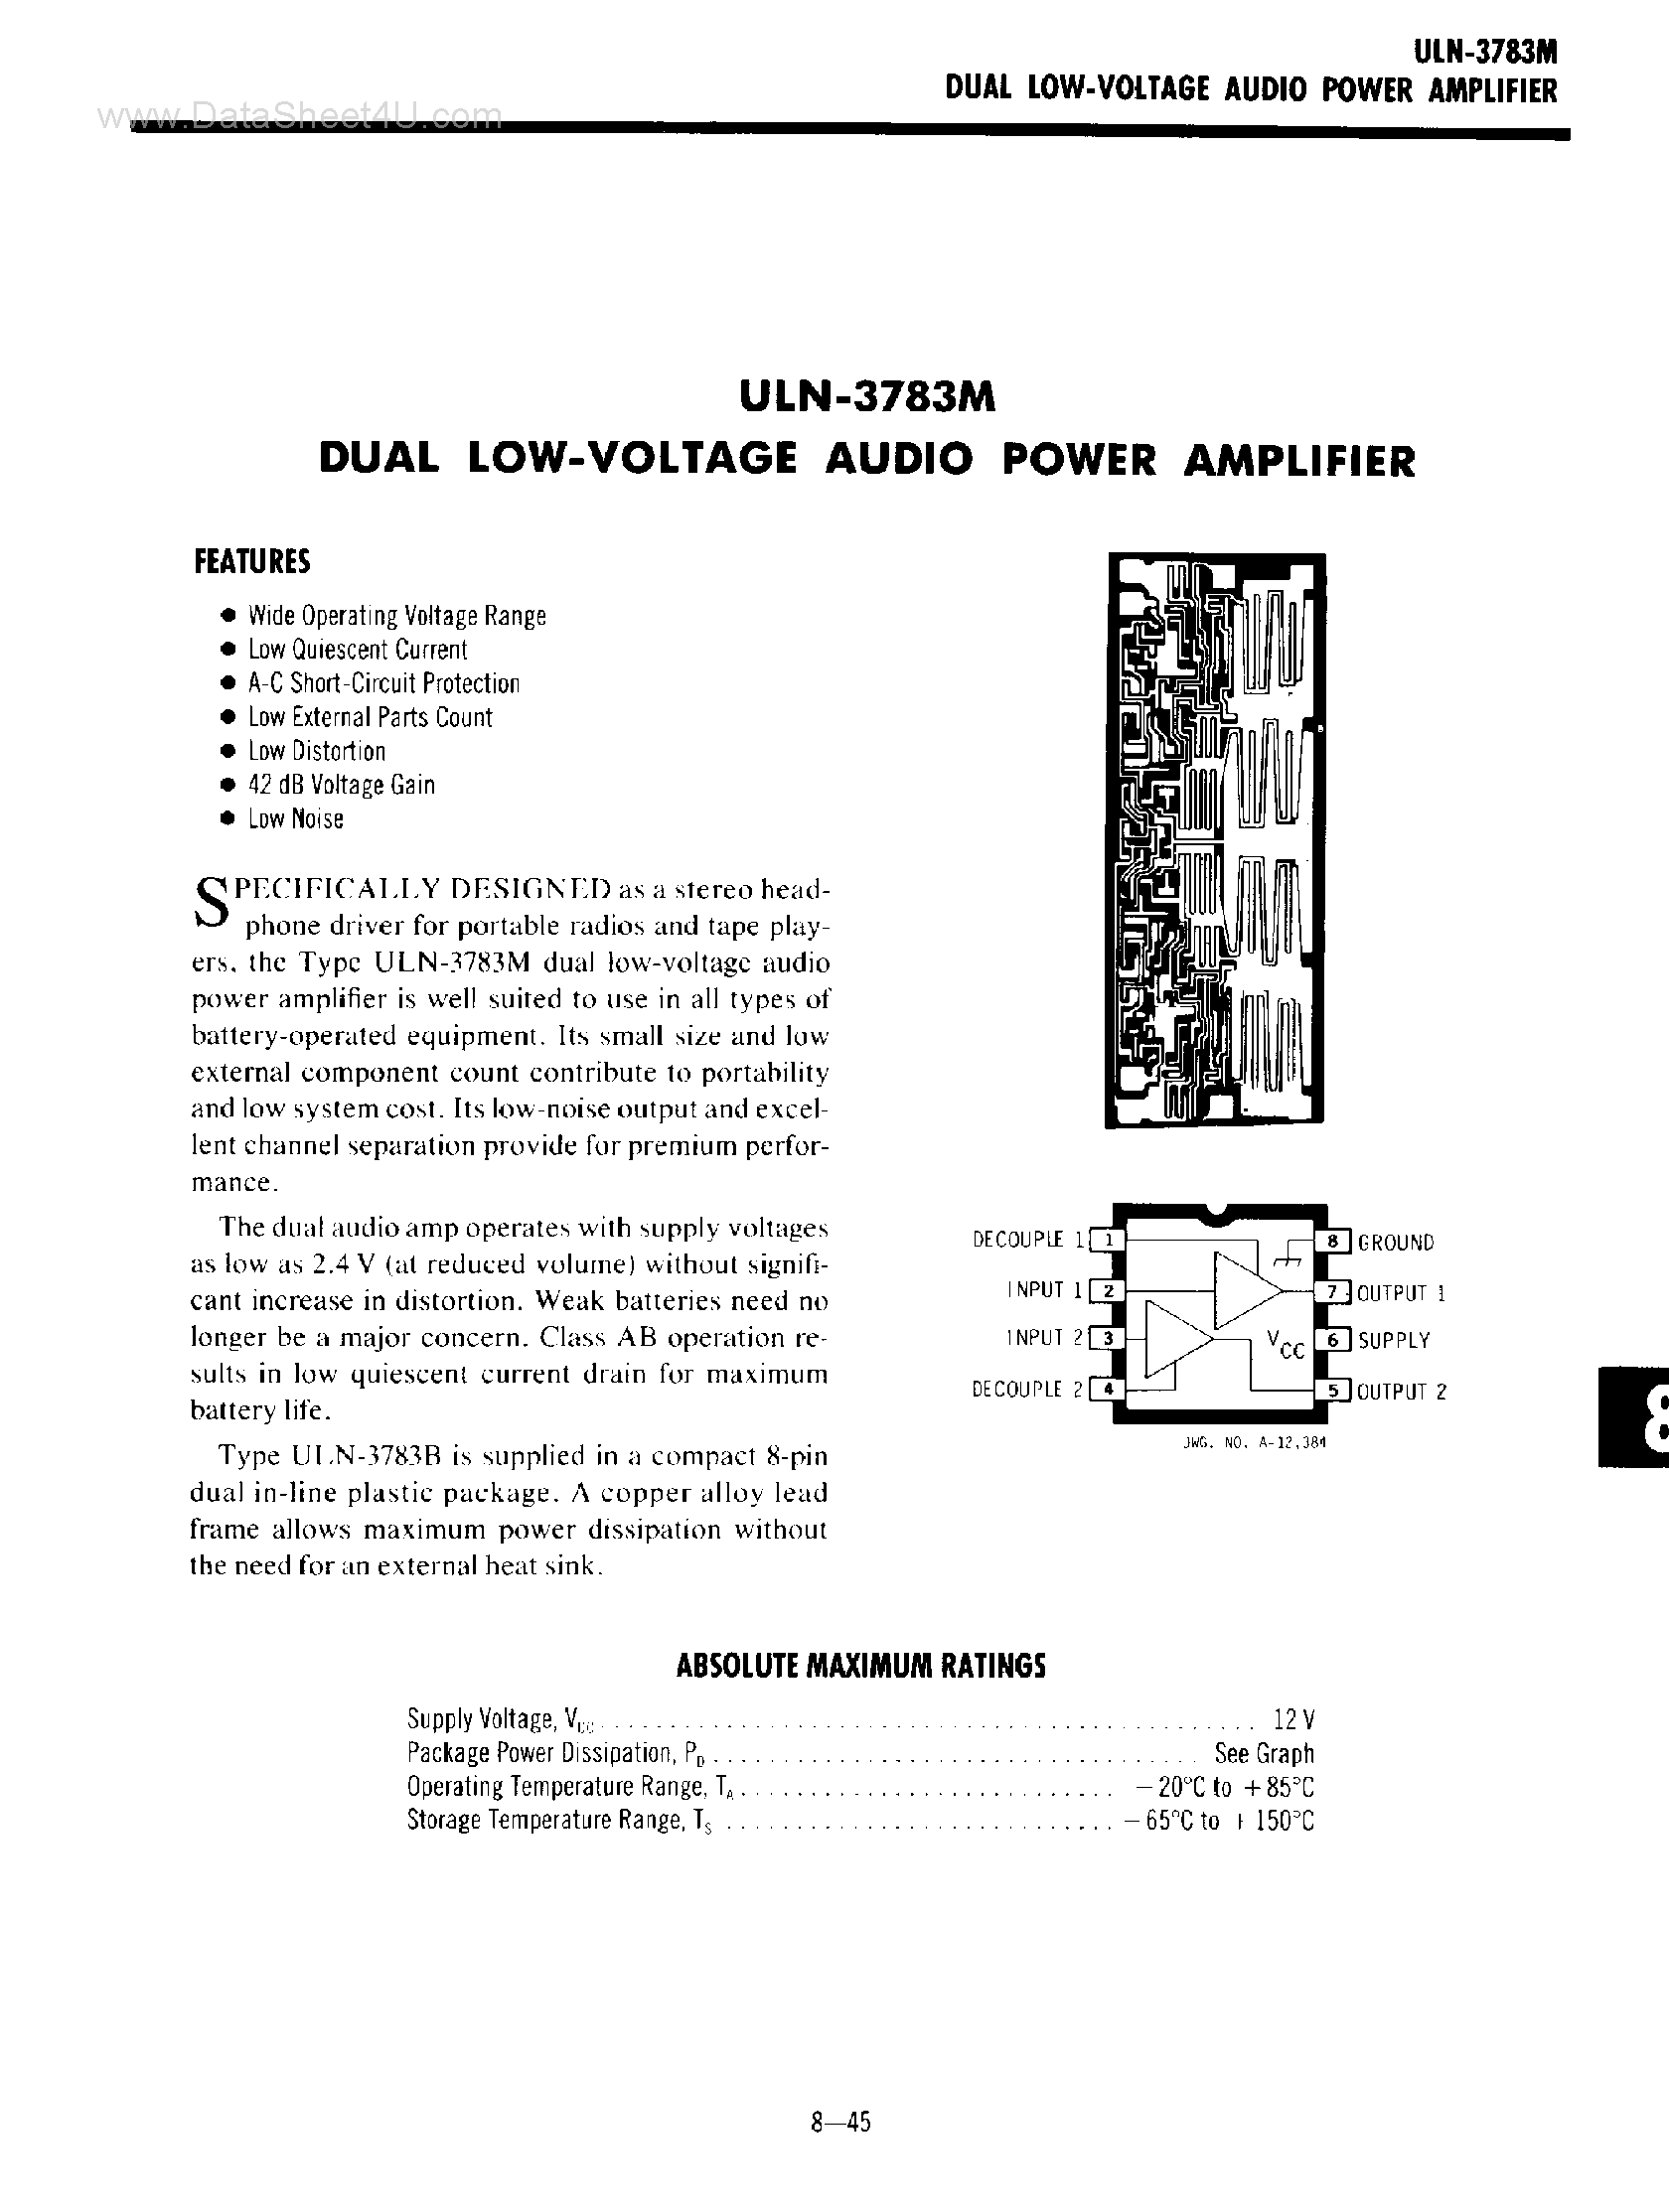 Datasheet ULN-3783M - Dual Low Voltage Audio Power Amplifier page 1